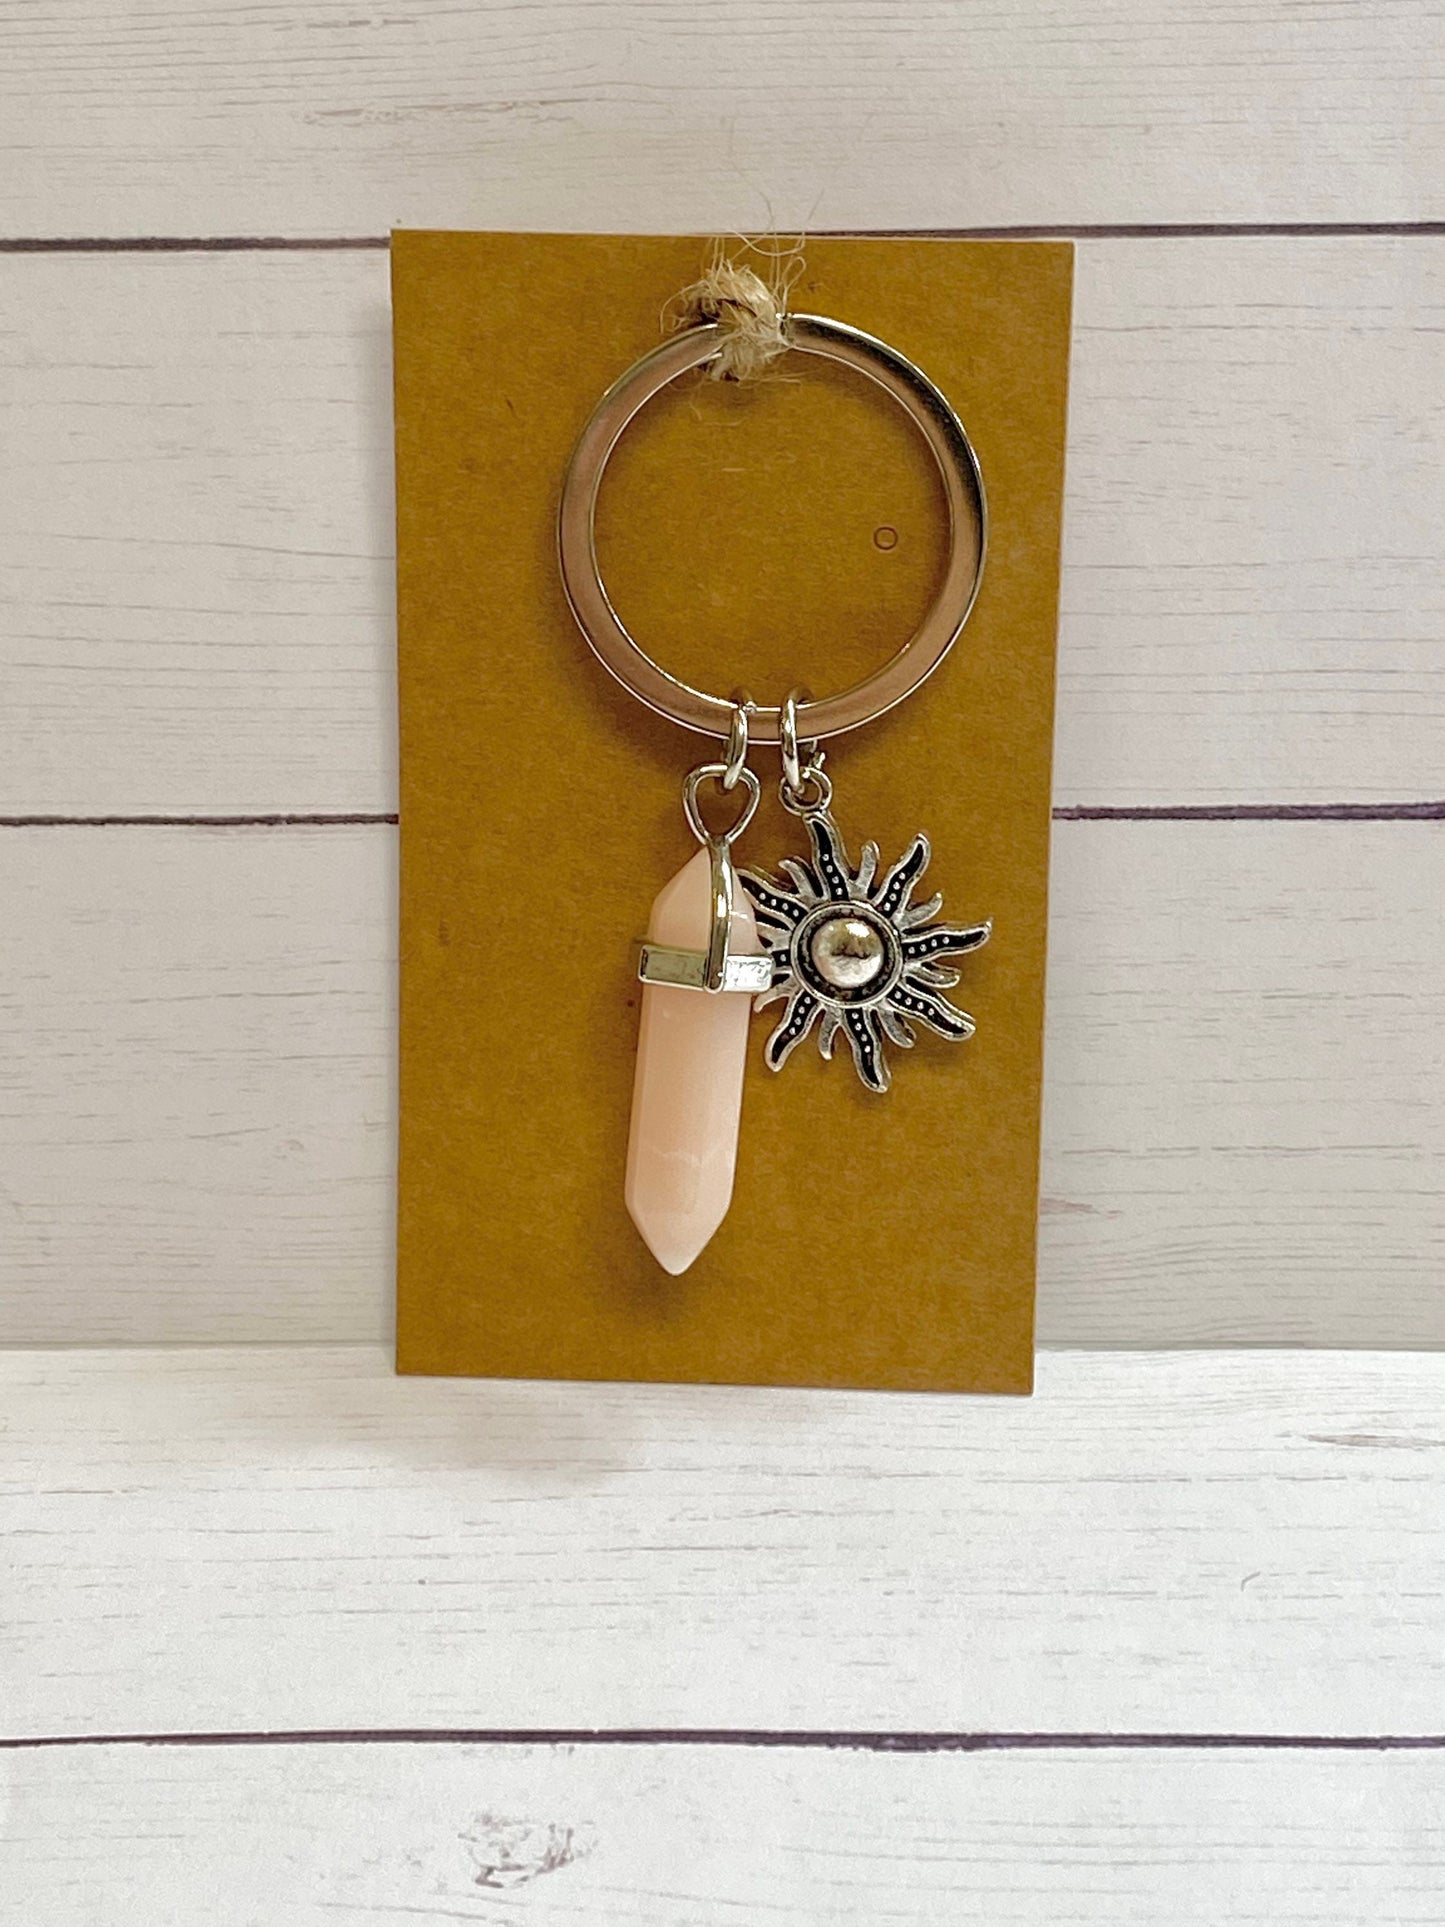 Pink crystal inspired resin keychain with sun charm